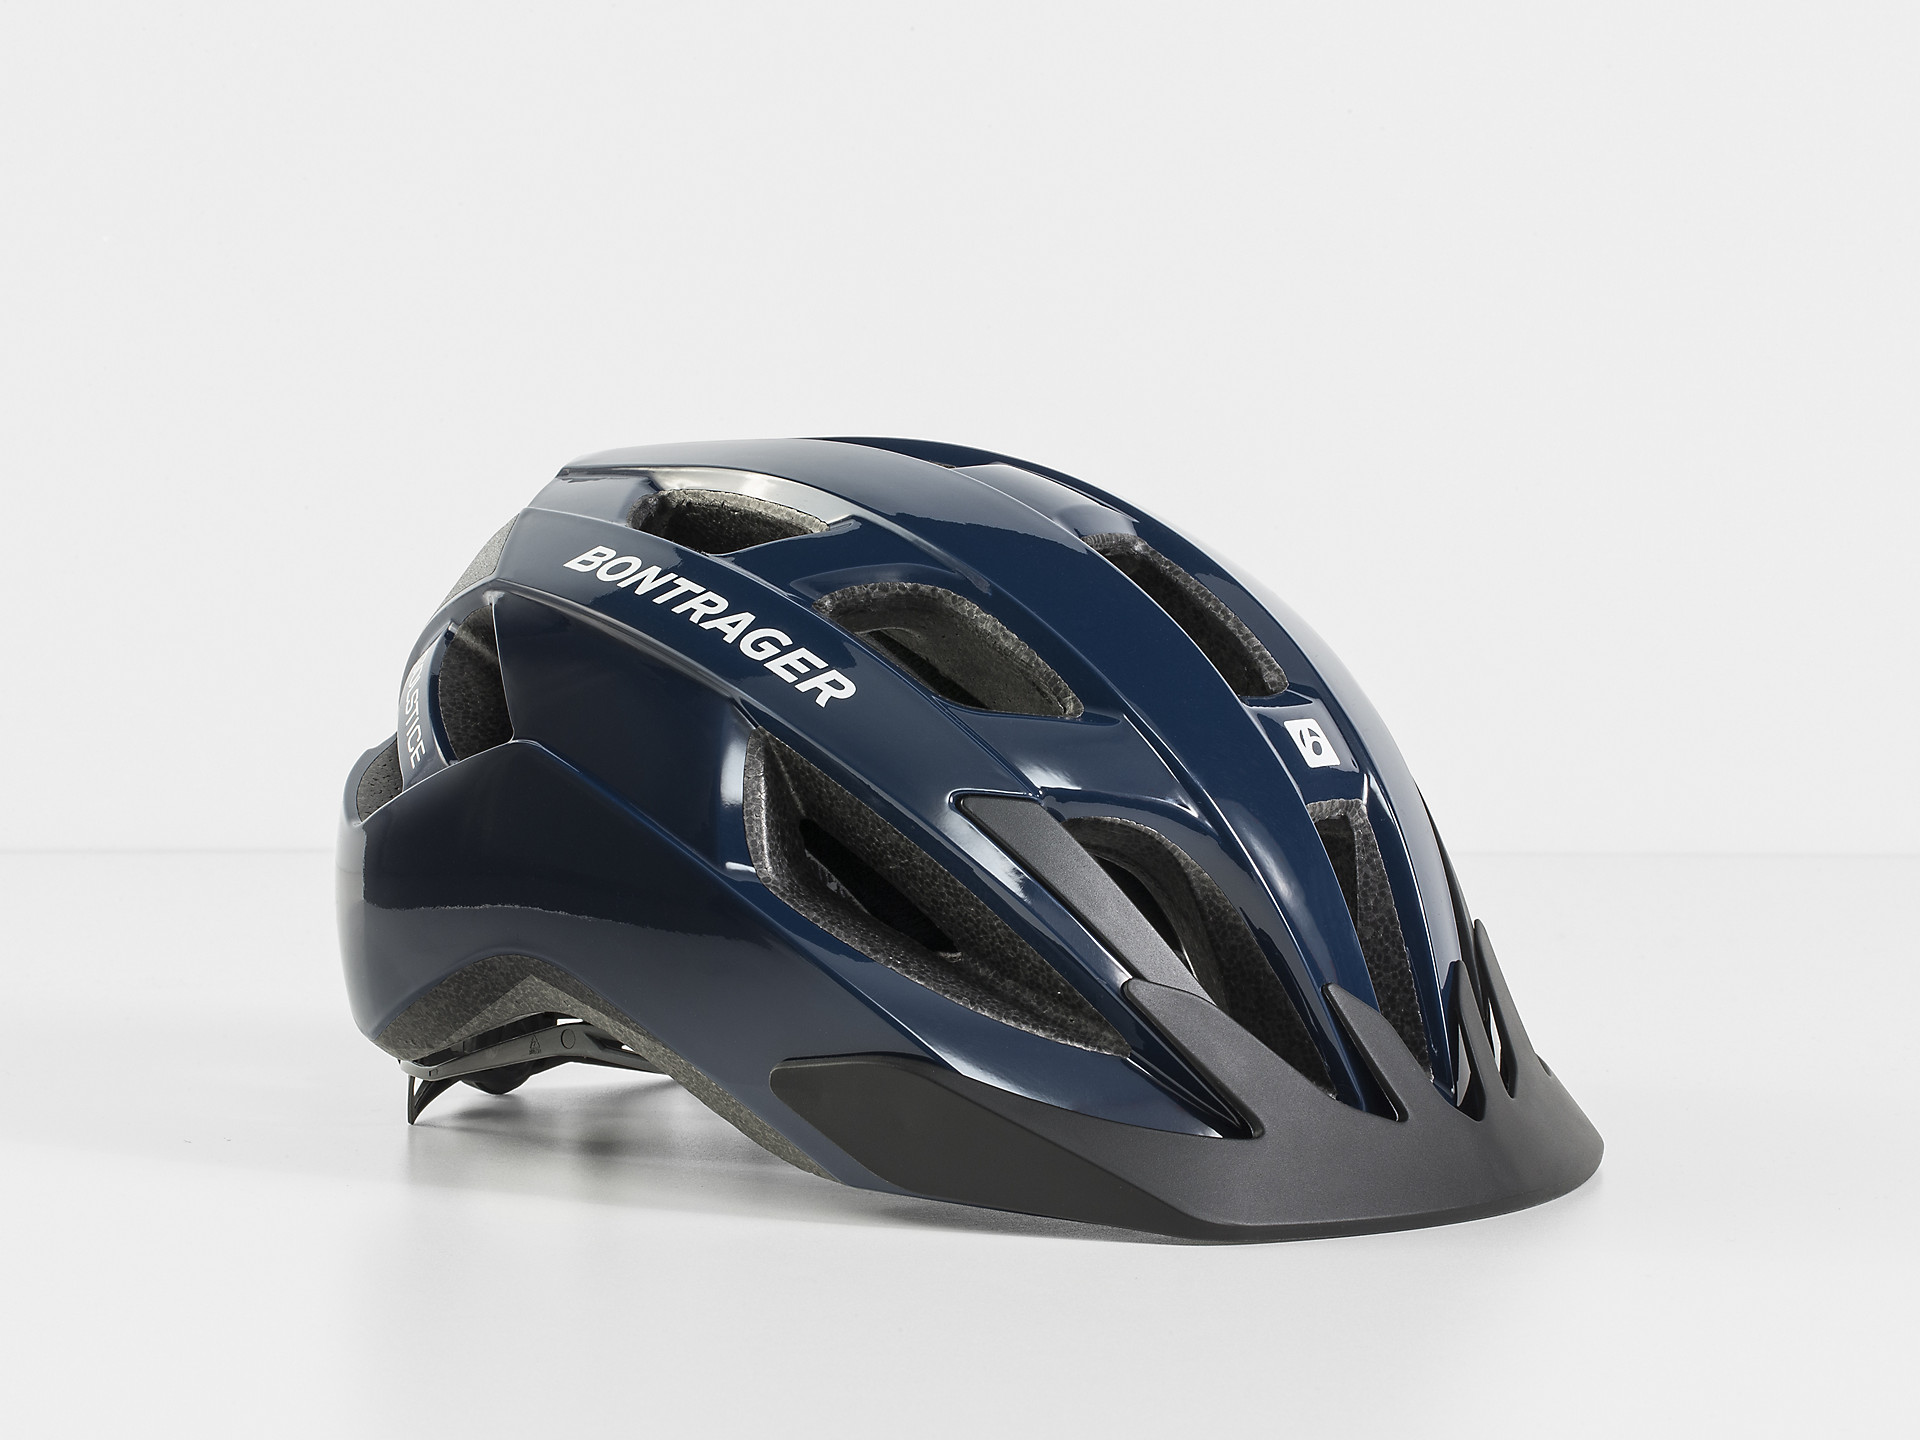 <a href="https://cycles-clement.be/product/casque-bont-solstice-m-l-navy-ce/">CASQUE BONT SOLSTICE  M/L NAVY CE</a>